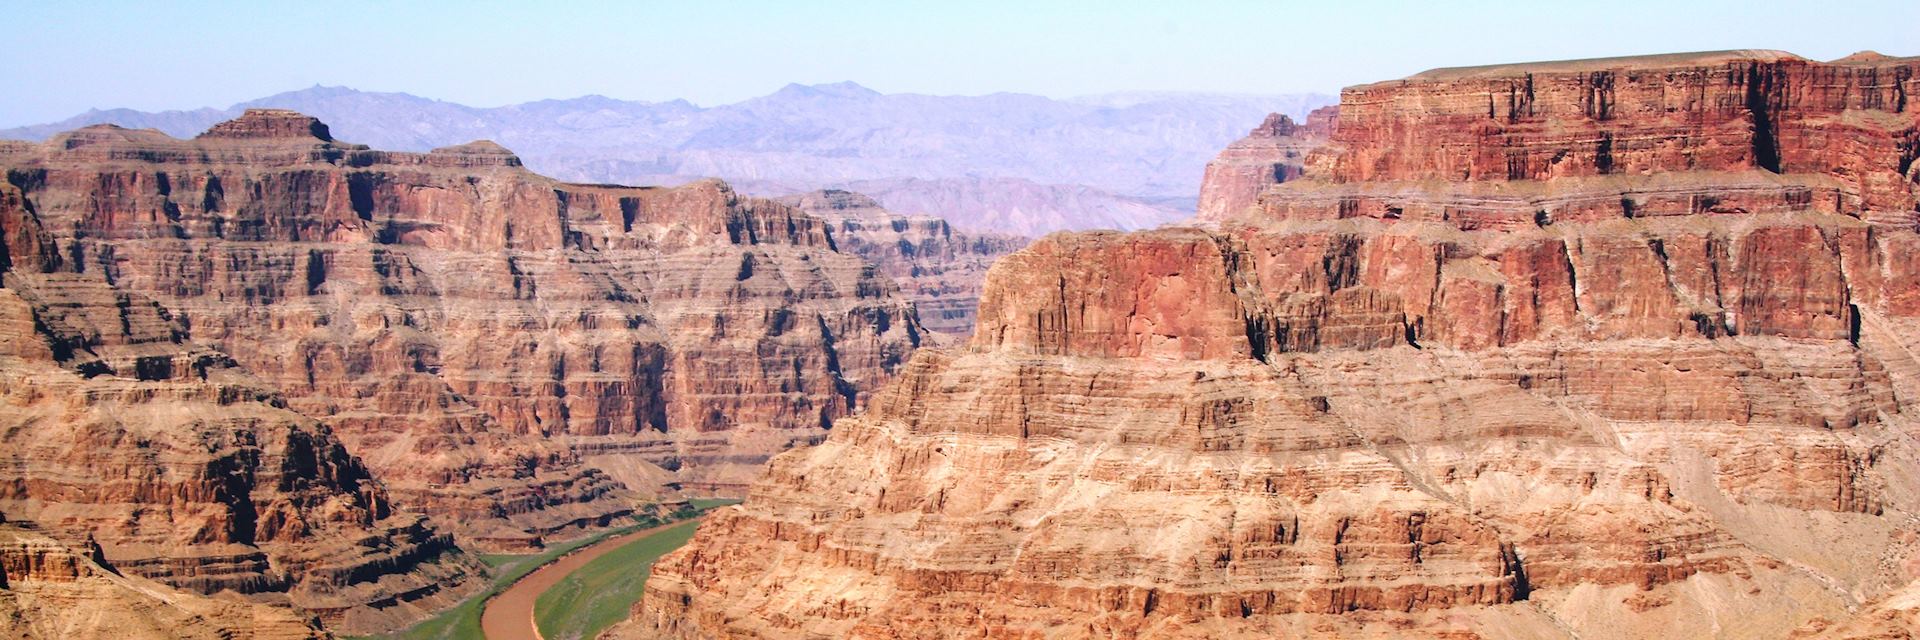 Views on the Grand Canyon helicopter tour